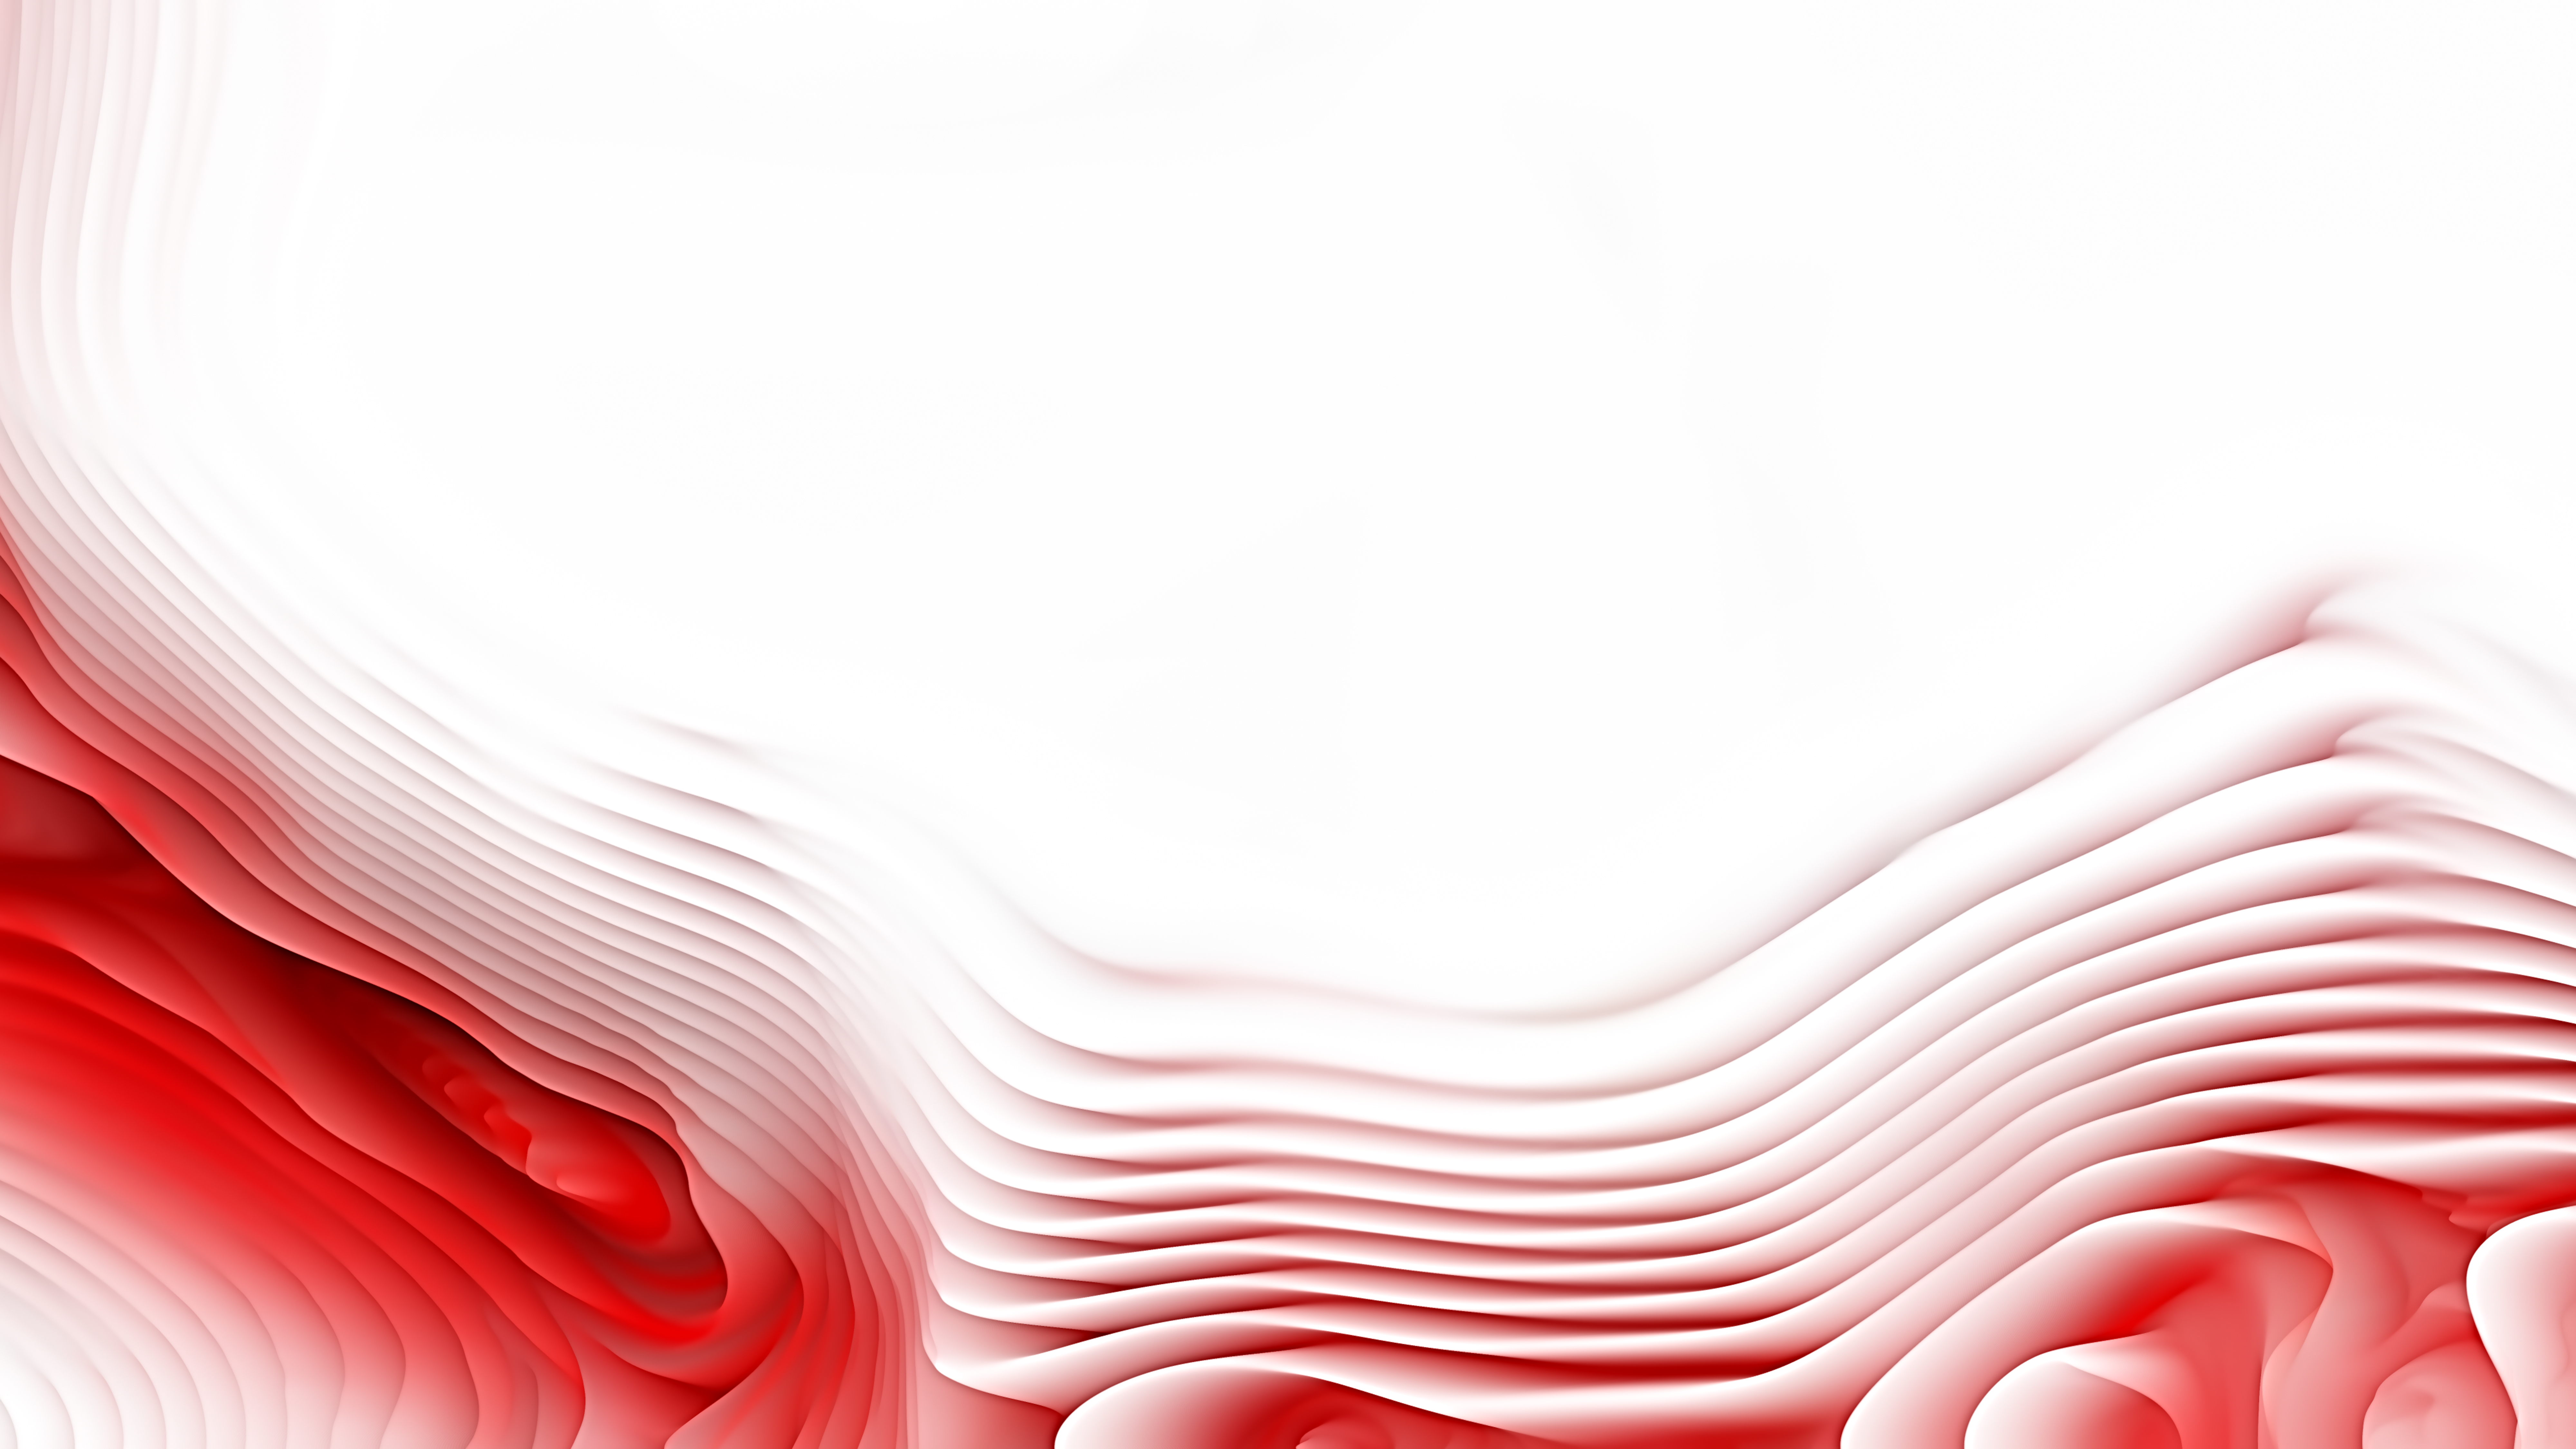 Free Red and White 3d Abstract Curved Lines Background